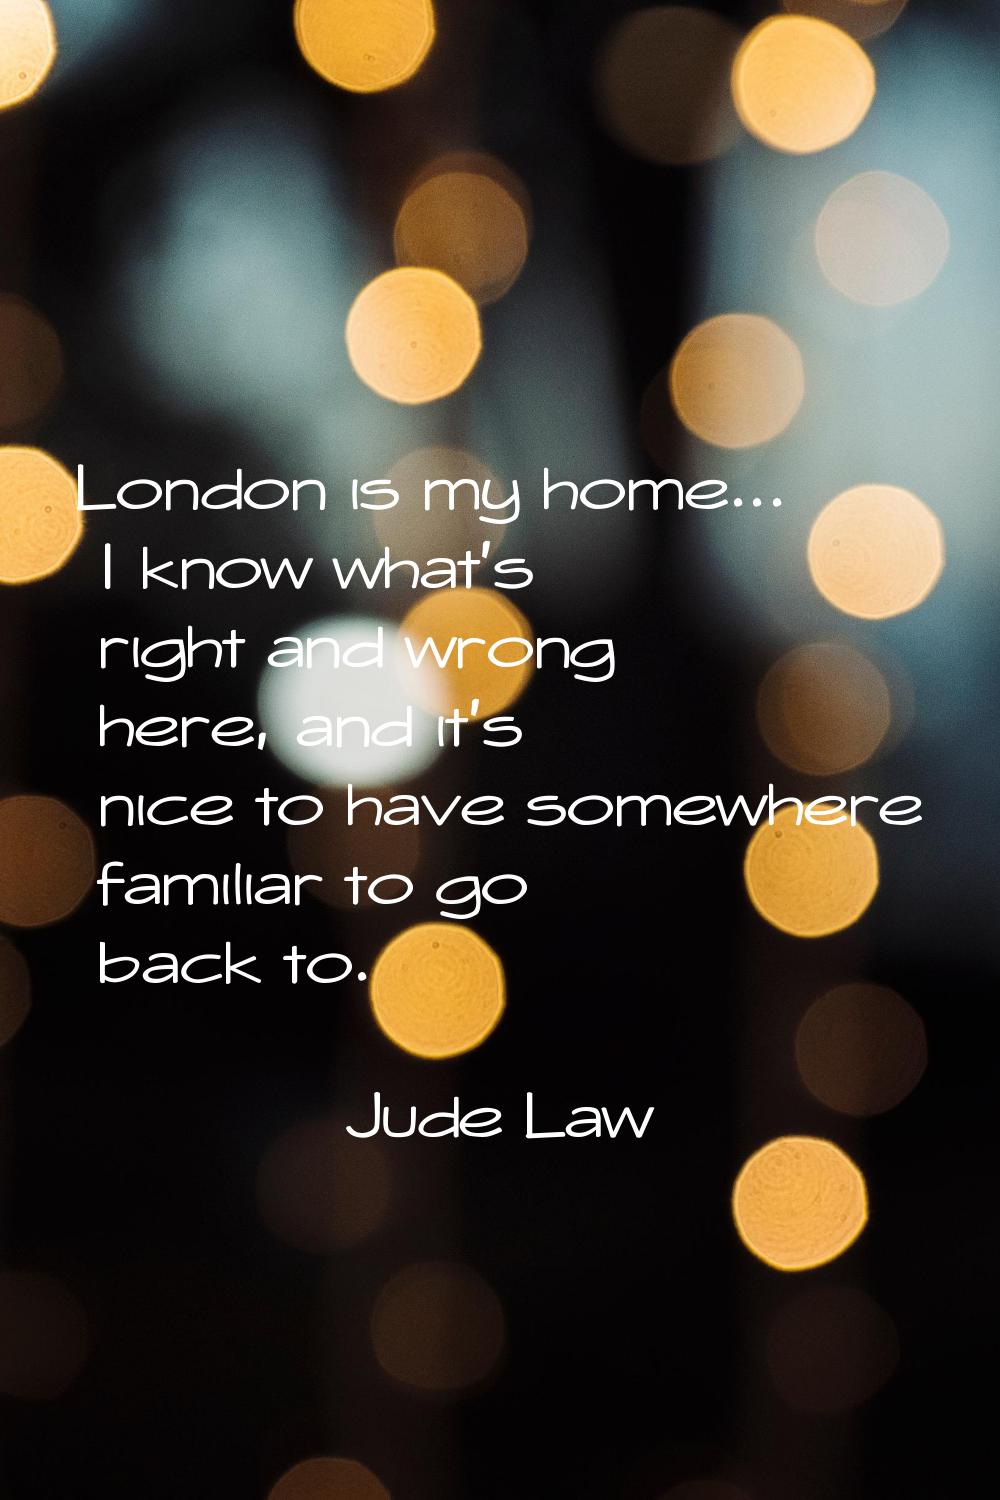 London is my home... I know what's right and wrong here, and it's nice to have somewhere familiar t